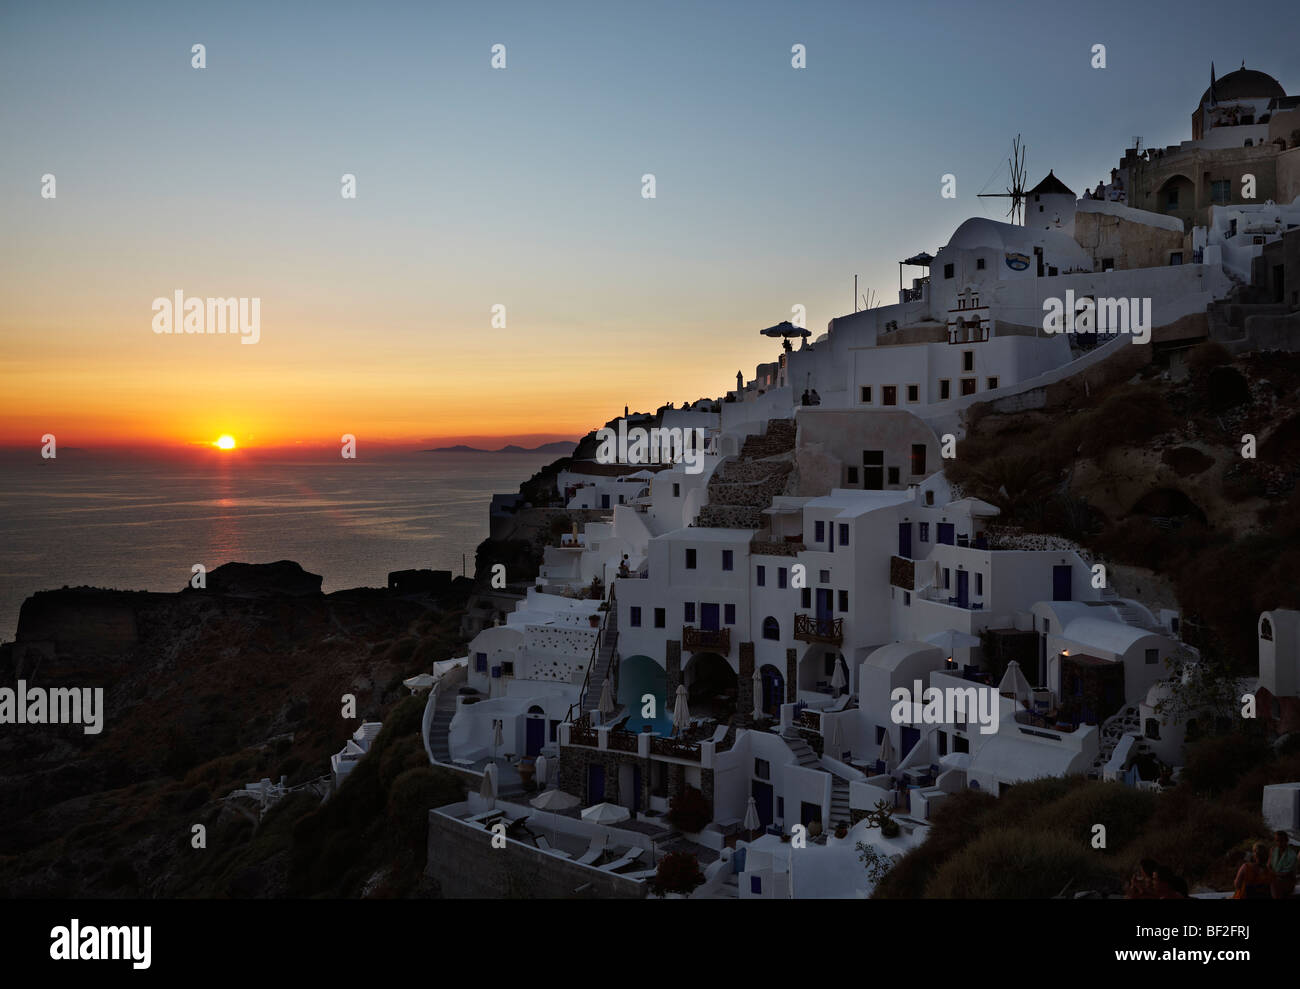 The famous sunset at Oia, Santorini, Cyclades islands, Greece Stock Photo